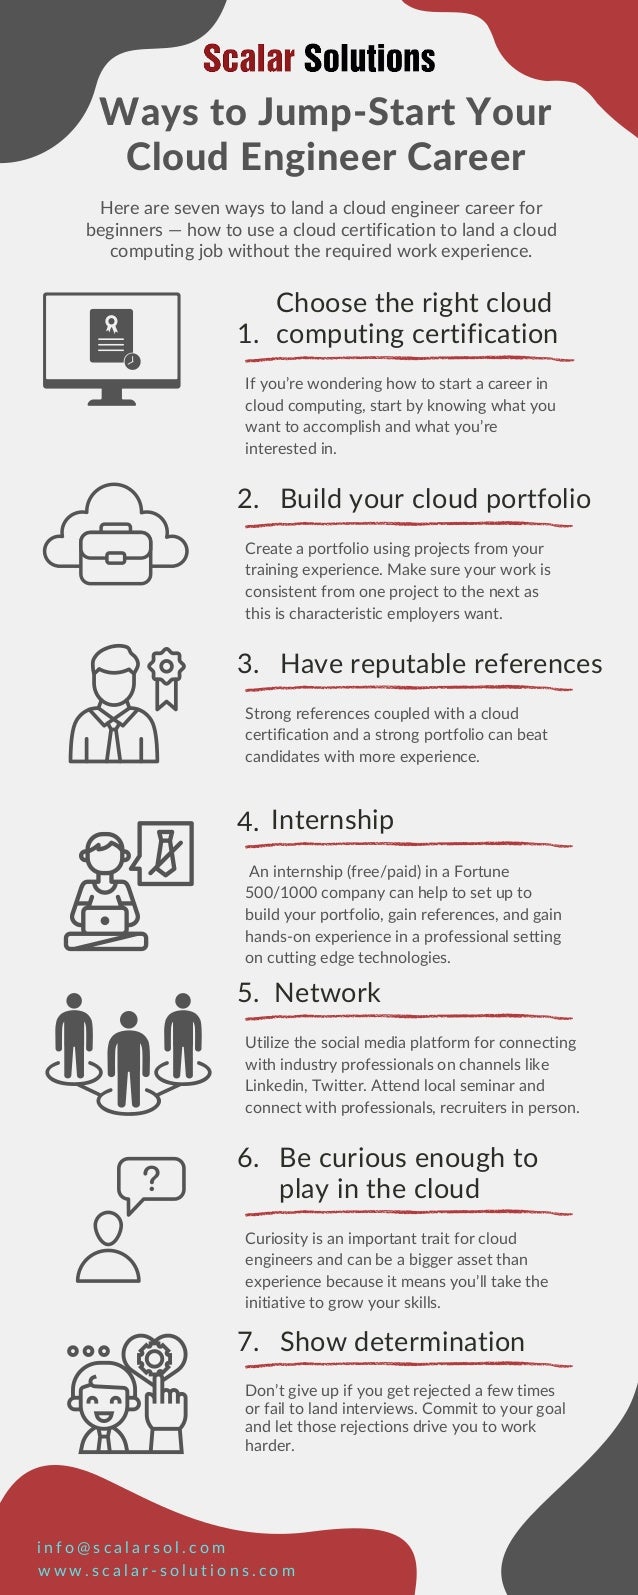 If you’re wondering how to start a career in
cloud computing, start by knowing what you
want to accomplish and what you’re
interested in.
Choose the right cloud
computing certification
Create a portfolio using projects from your
training experience. Make sure your work is
consistent from one project to the next as
this is characteristic employers want.
Build your cloud portfolio
Have reputable references
Internship
Network
Be curious enough to
play in the cloud
Show determination
1.
Ways to Jump-Start Your
Cloud Engineer Career
Here are seven ways to land a cloud engineer career for
beginners — how to use a cloud certification to land a cloud
computing job without the required work experience.
2.
Strong references coupled with a cloud
certification and a strong portfolio can beat
candidates with more experience.
3.
An internship (free/paid) in a Fortune
500/1000 company can help to set up to
build your portfolio, gain references, and gain
hands-on experience in a professional setting
on cutting edge technologies.
4.
Utilize the social media platform for connecting
with industry professionals on channels like
Linkedin, Twitter. Attend local seminar and
connect with professionals, recruiters in person.
5.
Curiosity is an important trait for cloud
engineers and can be a bigger asset than
experience because it means you’ll take the
initiative to grow your skills.
6.
Don’t give up if you get rejected a few times
or fail to land interviews. Commit to your goal
and let those rejections drive you to work
harder.
7.
w w w . s c a l a r - s o l u t i o n s . c o m
i n f o @ s c a l a r s o l . c o m
 